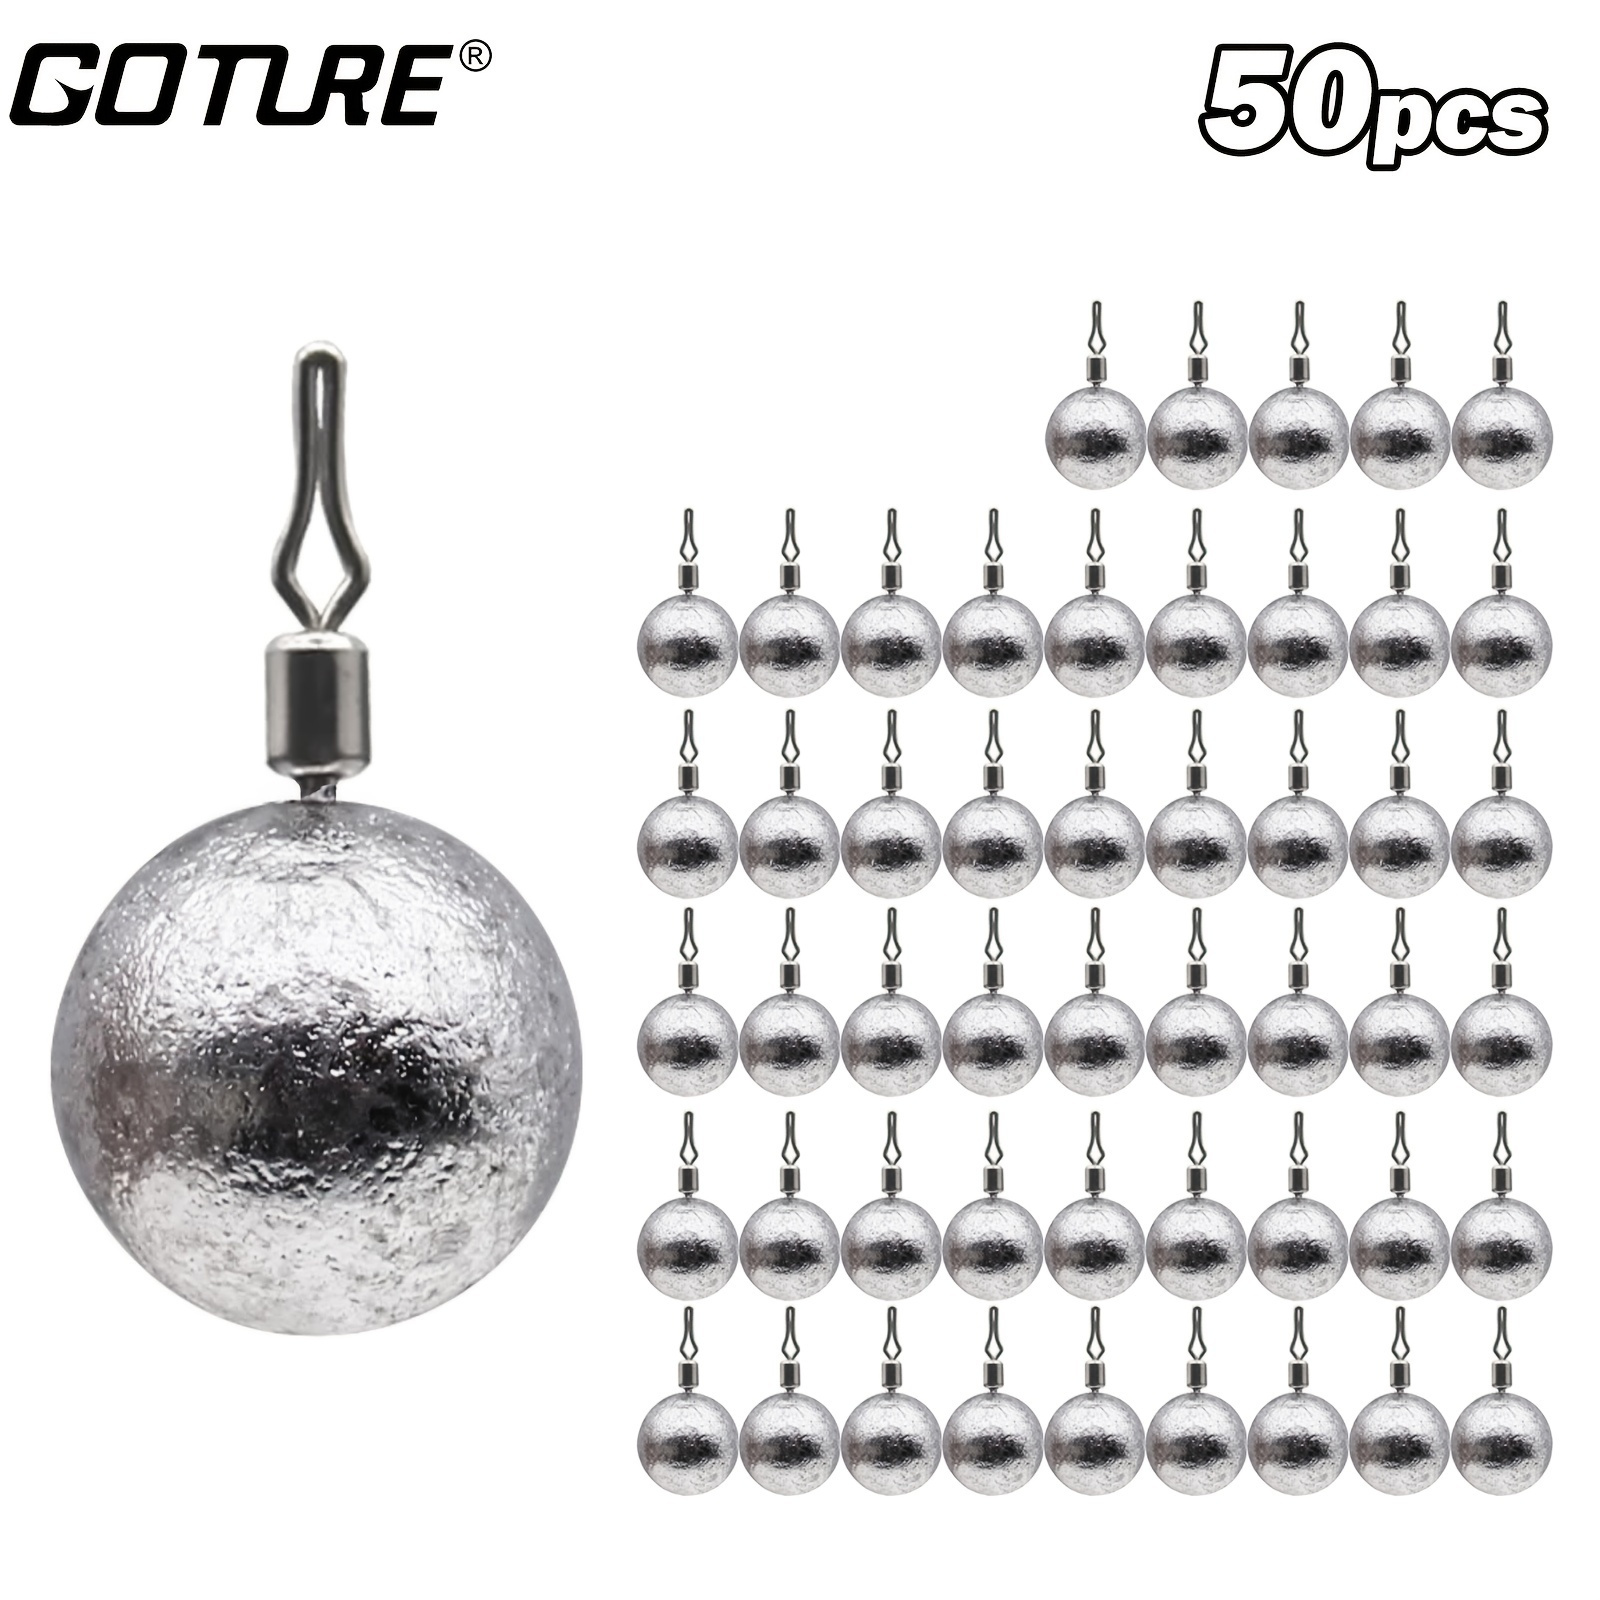 50pcs * Fishing Spherical Drop Shot Weights - Bulk Pack of 3.5g, 5g, and 7g  - Lead Skinny Sinkers with Barrel Swivels for Freshwater and Saltwate